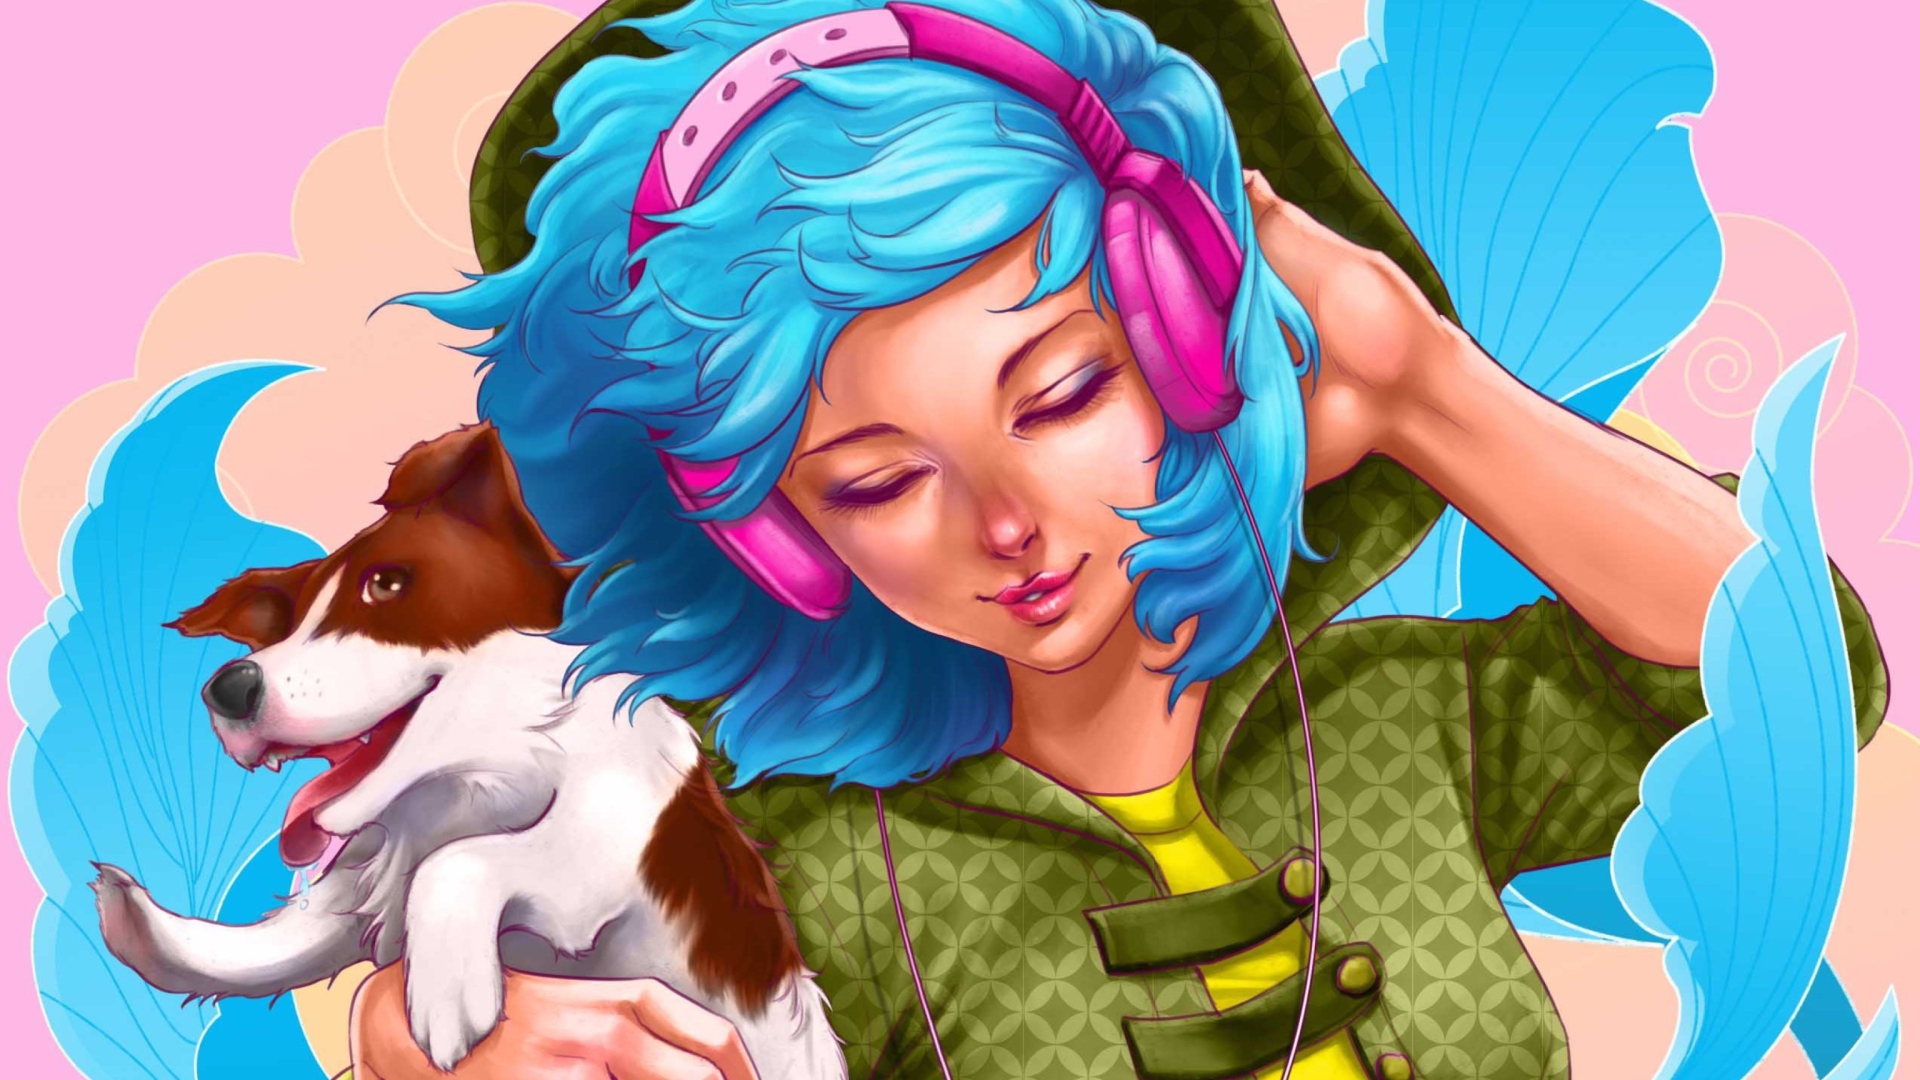 Girl With Blue Hair And Pink Headphones Drawing wallpaper 1920x1080